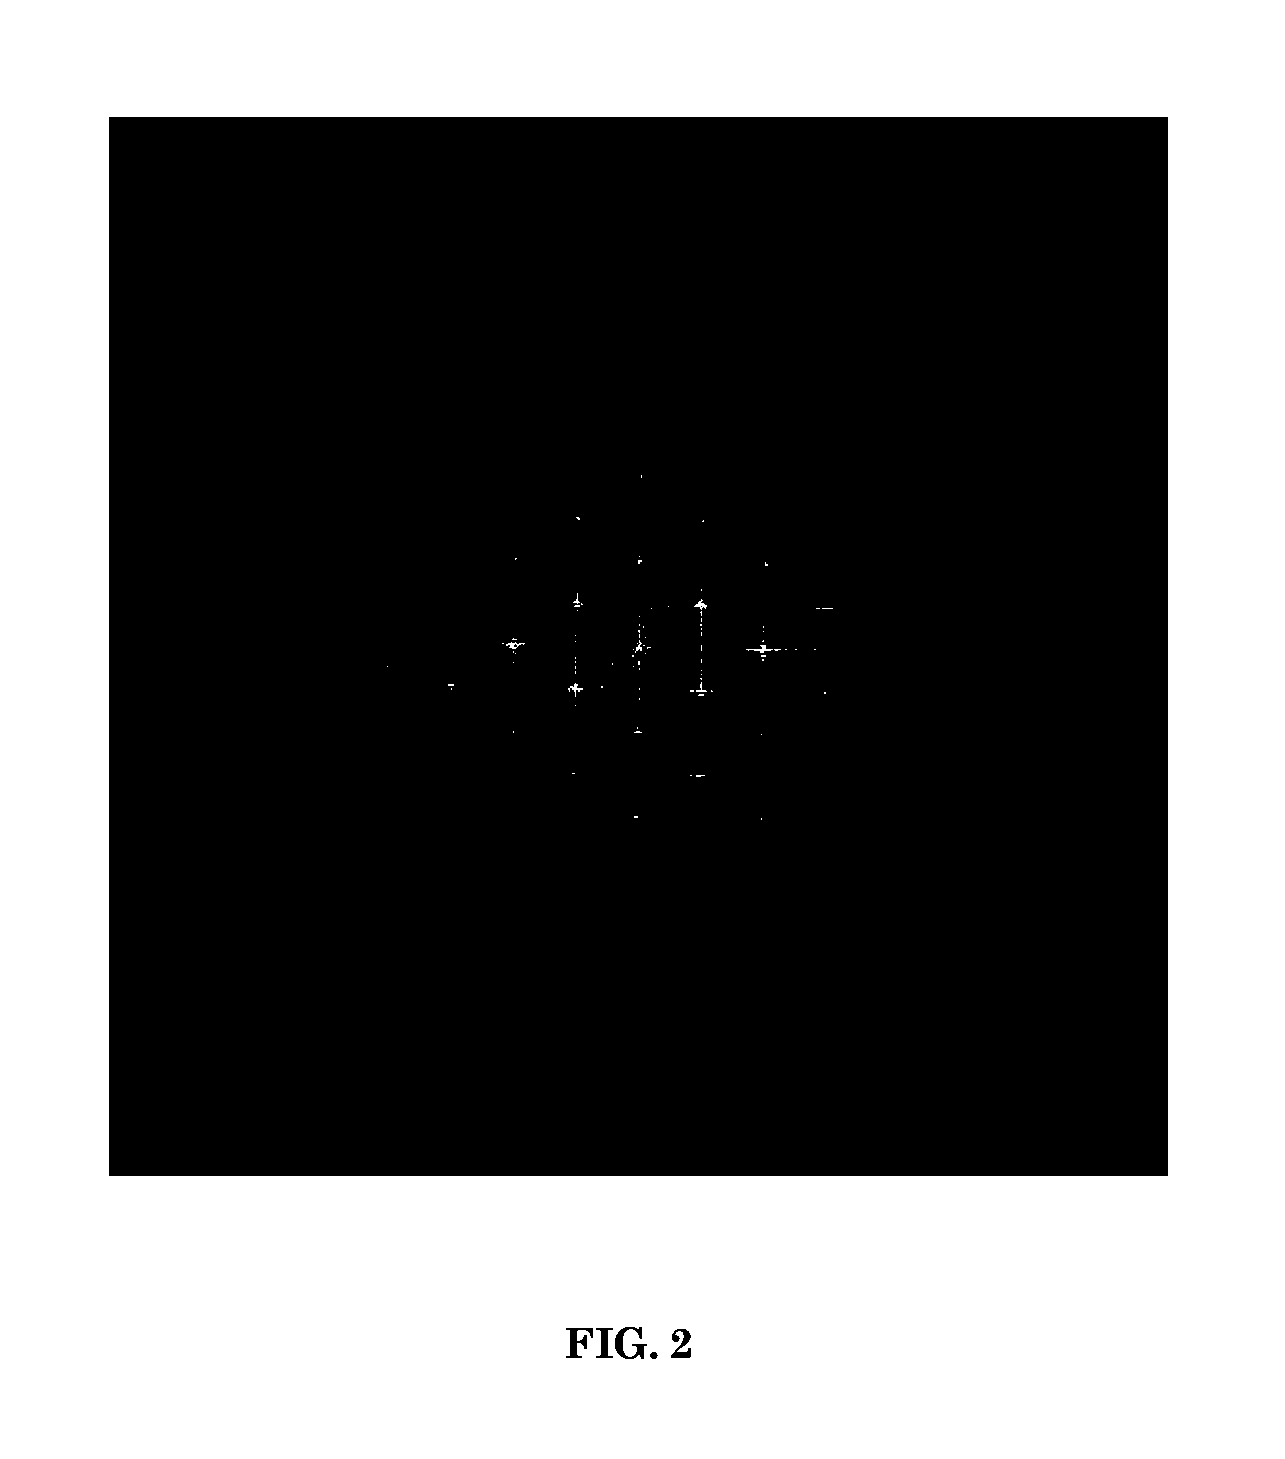 Composition and method for making picocrystalline artificial carbon atoms